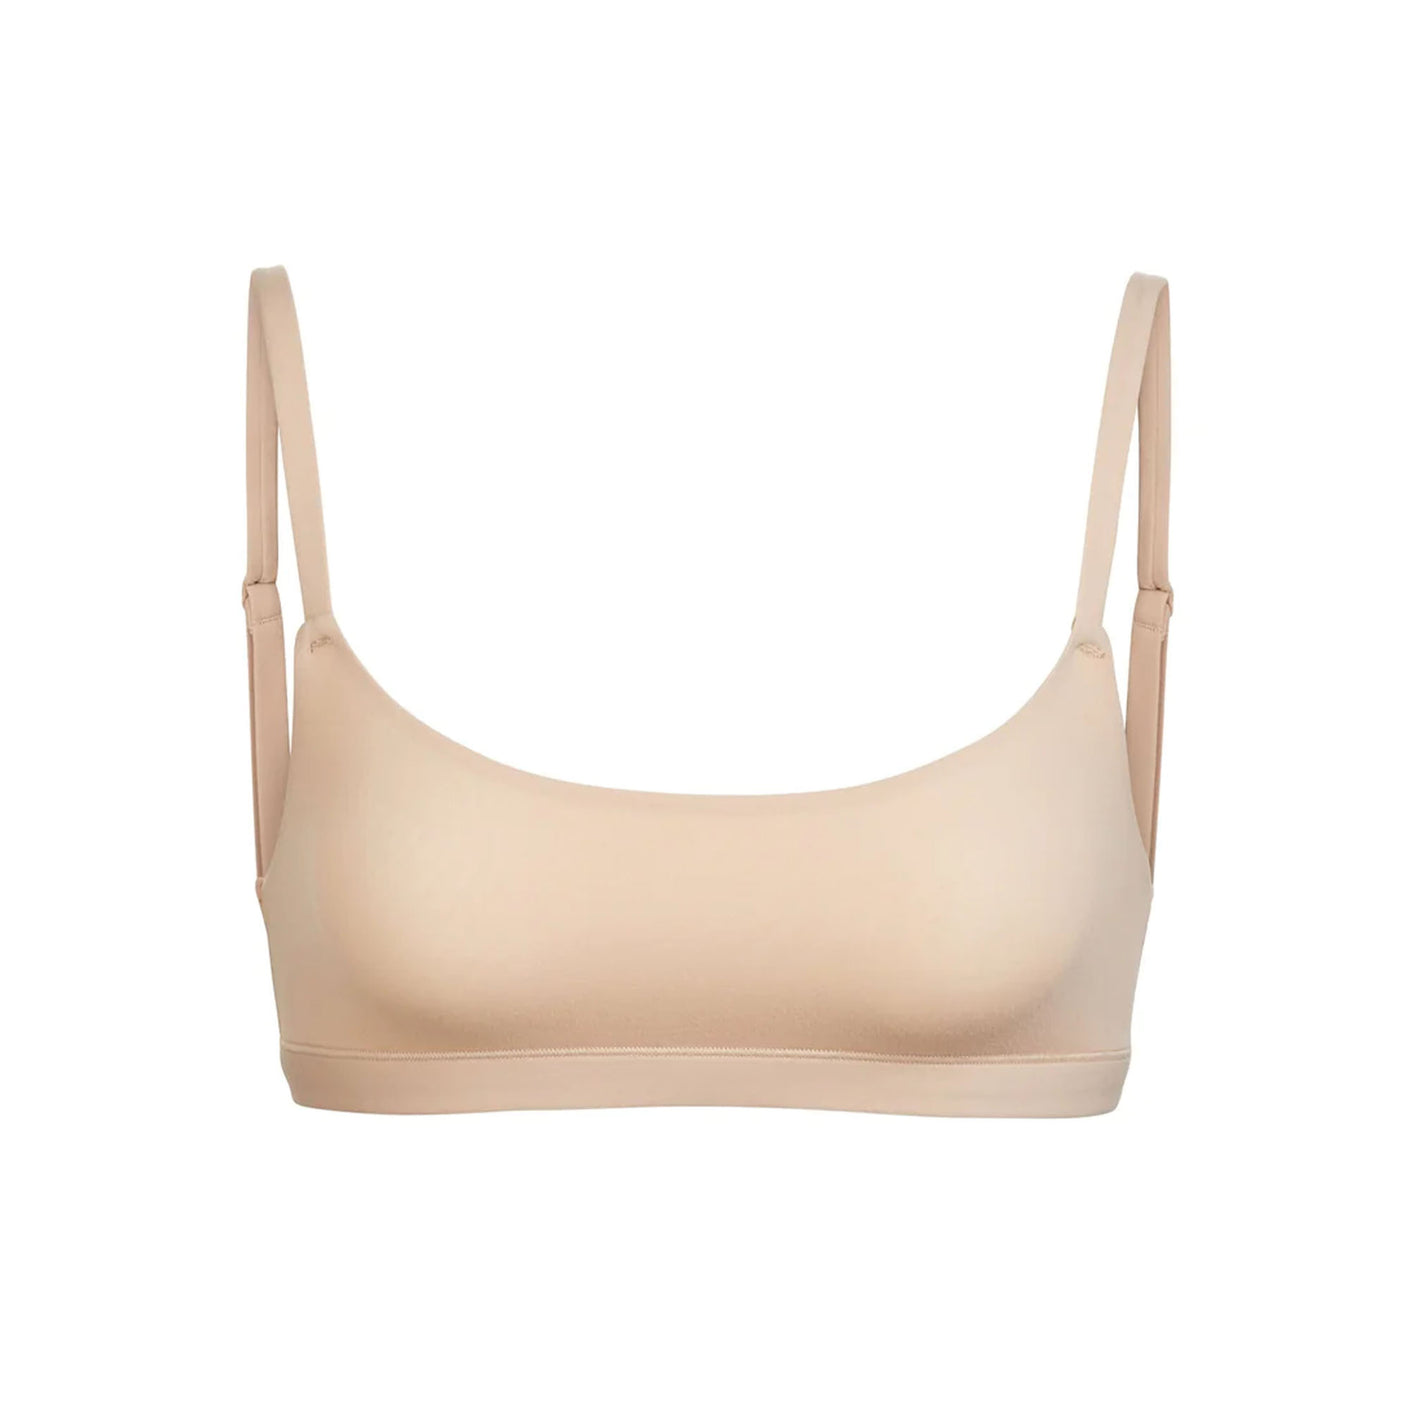 SKIMS Cotton Plunge Bralette in Iris Mica XS - $75 New With Tags